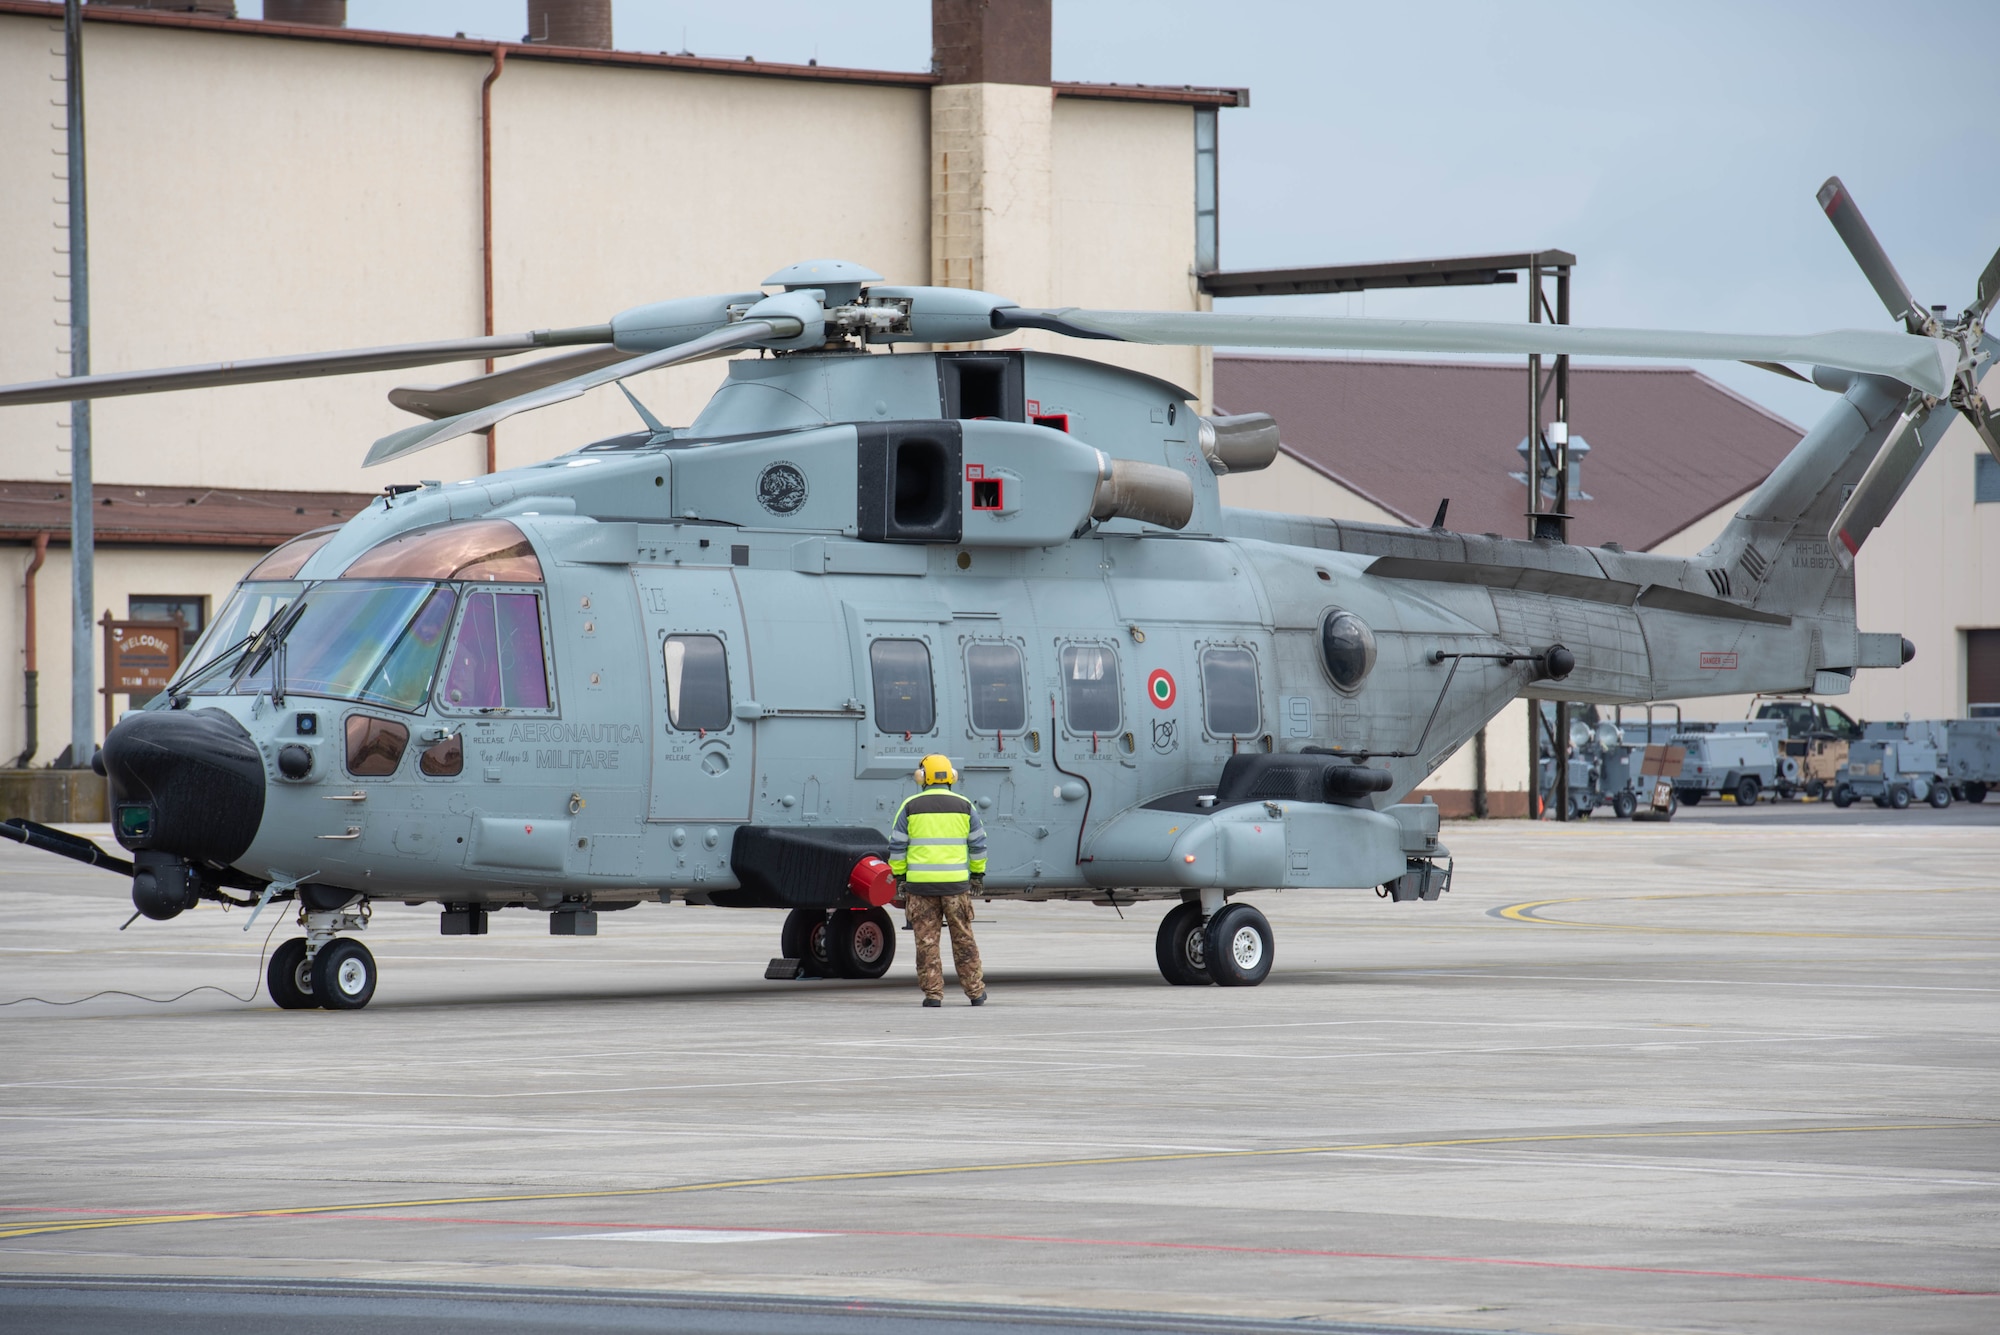 A man preps a helicopter before it departs.